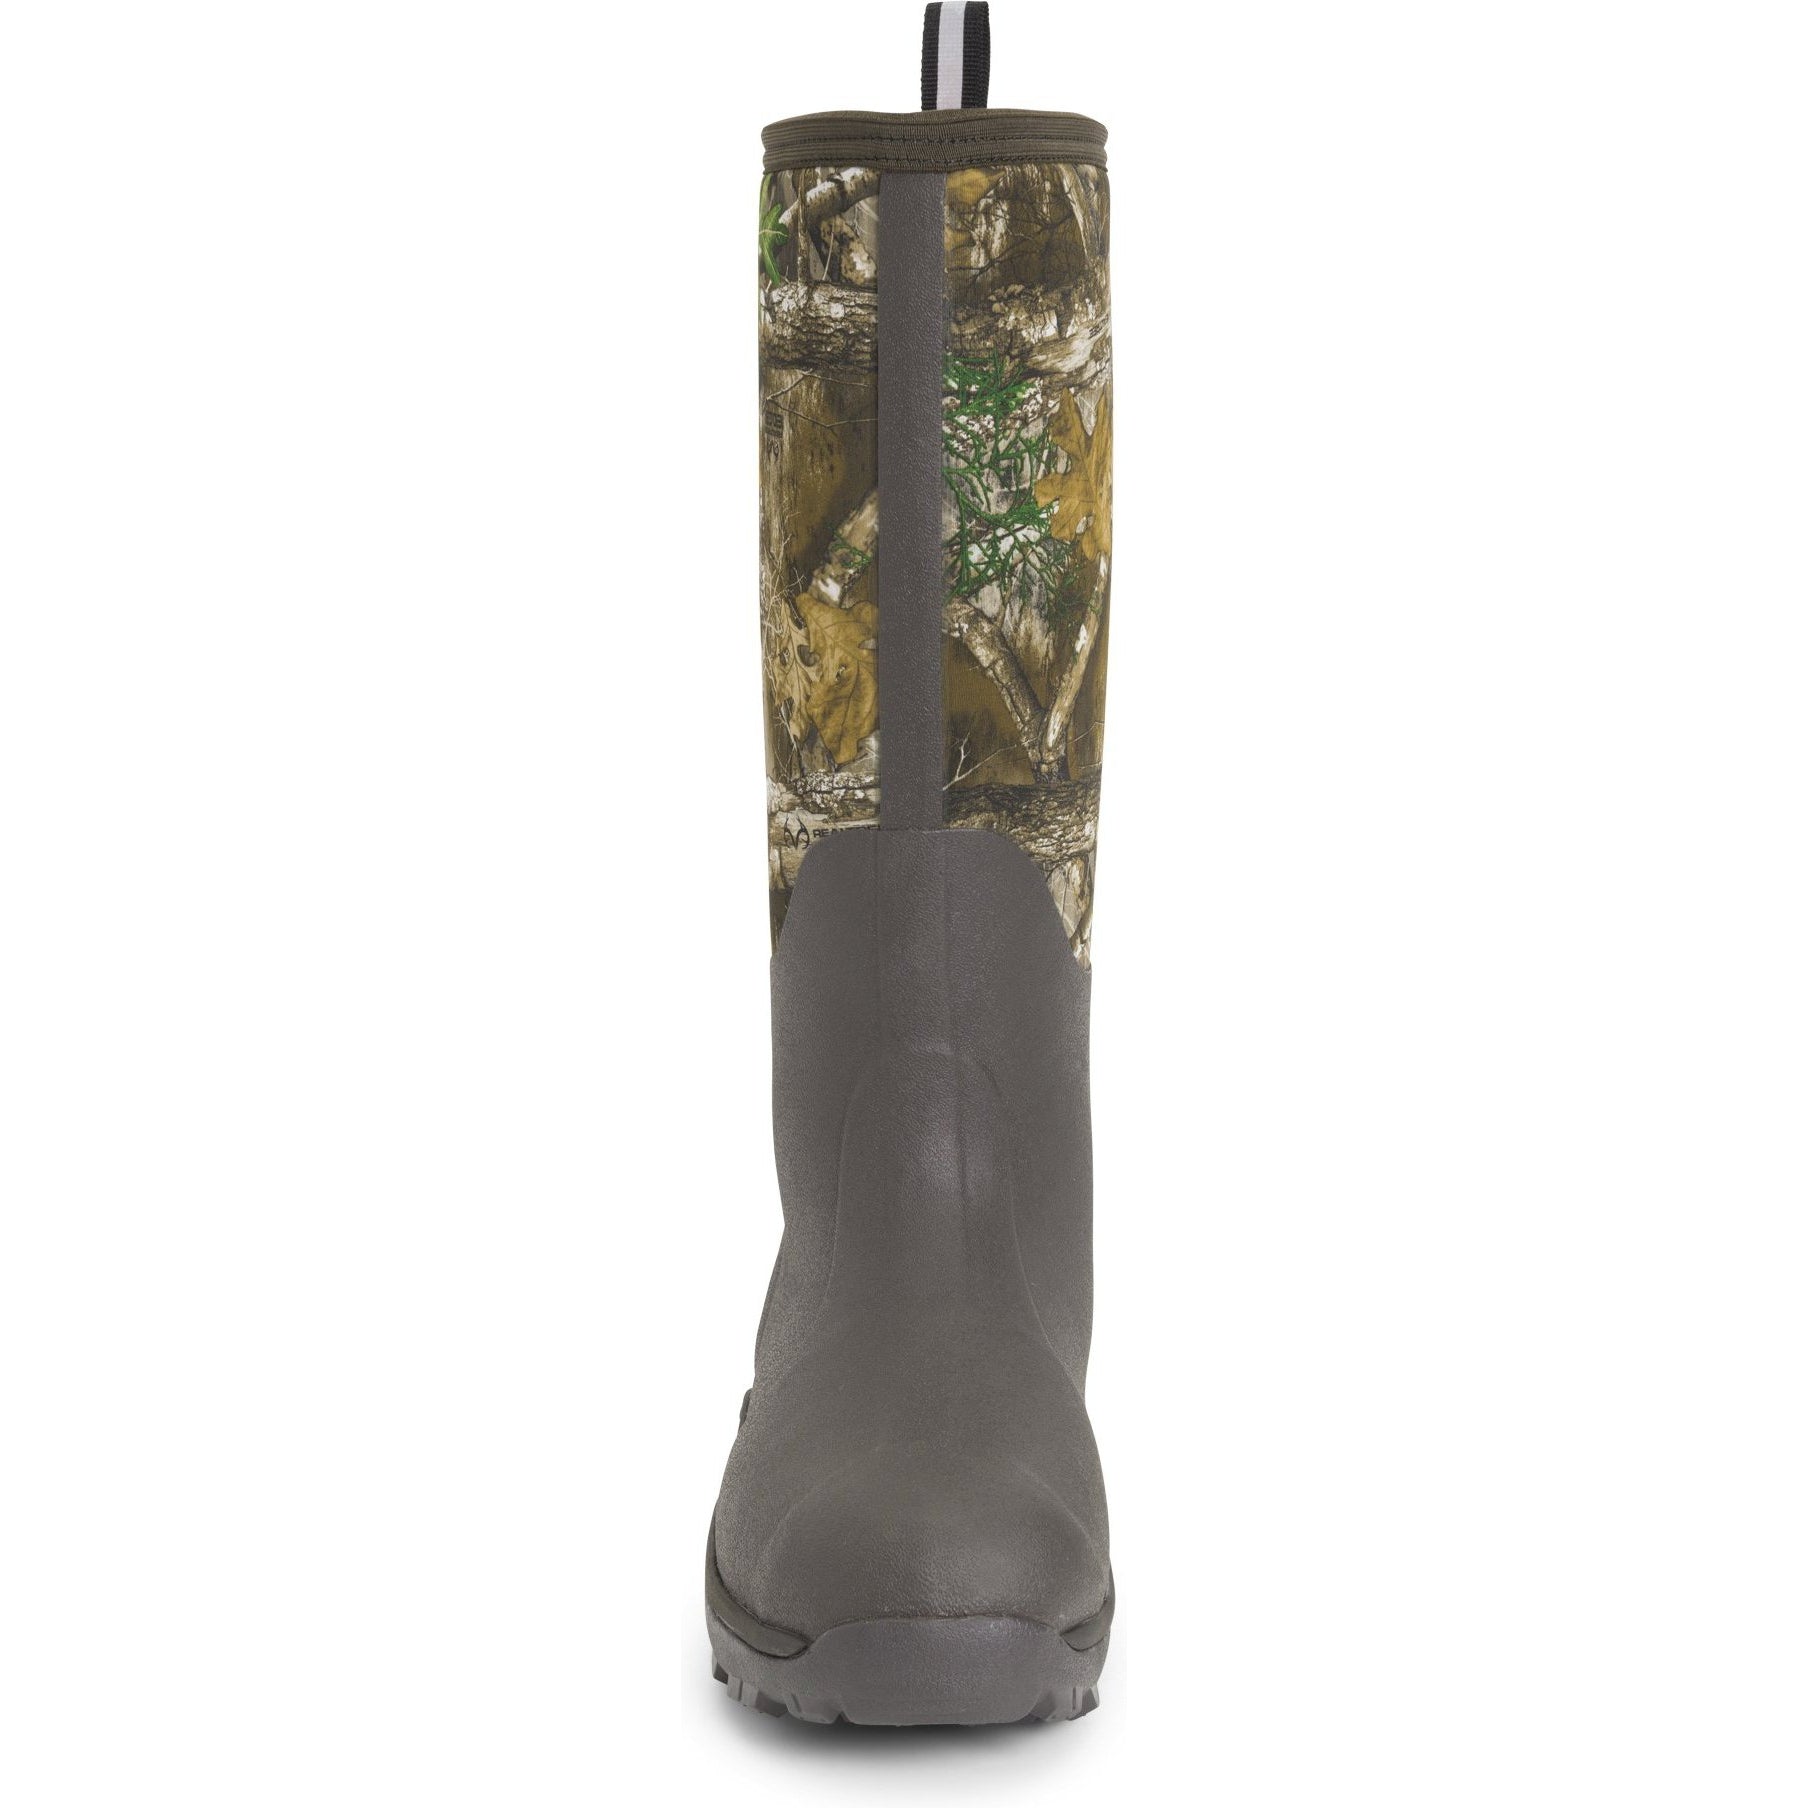 Muck Men's Woody Max WP Rubber Hunt Boot - Brown/Realtree Edge - WDM-RTE  - Overlook Boots